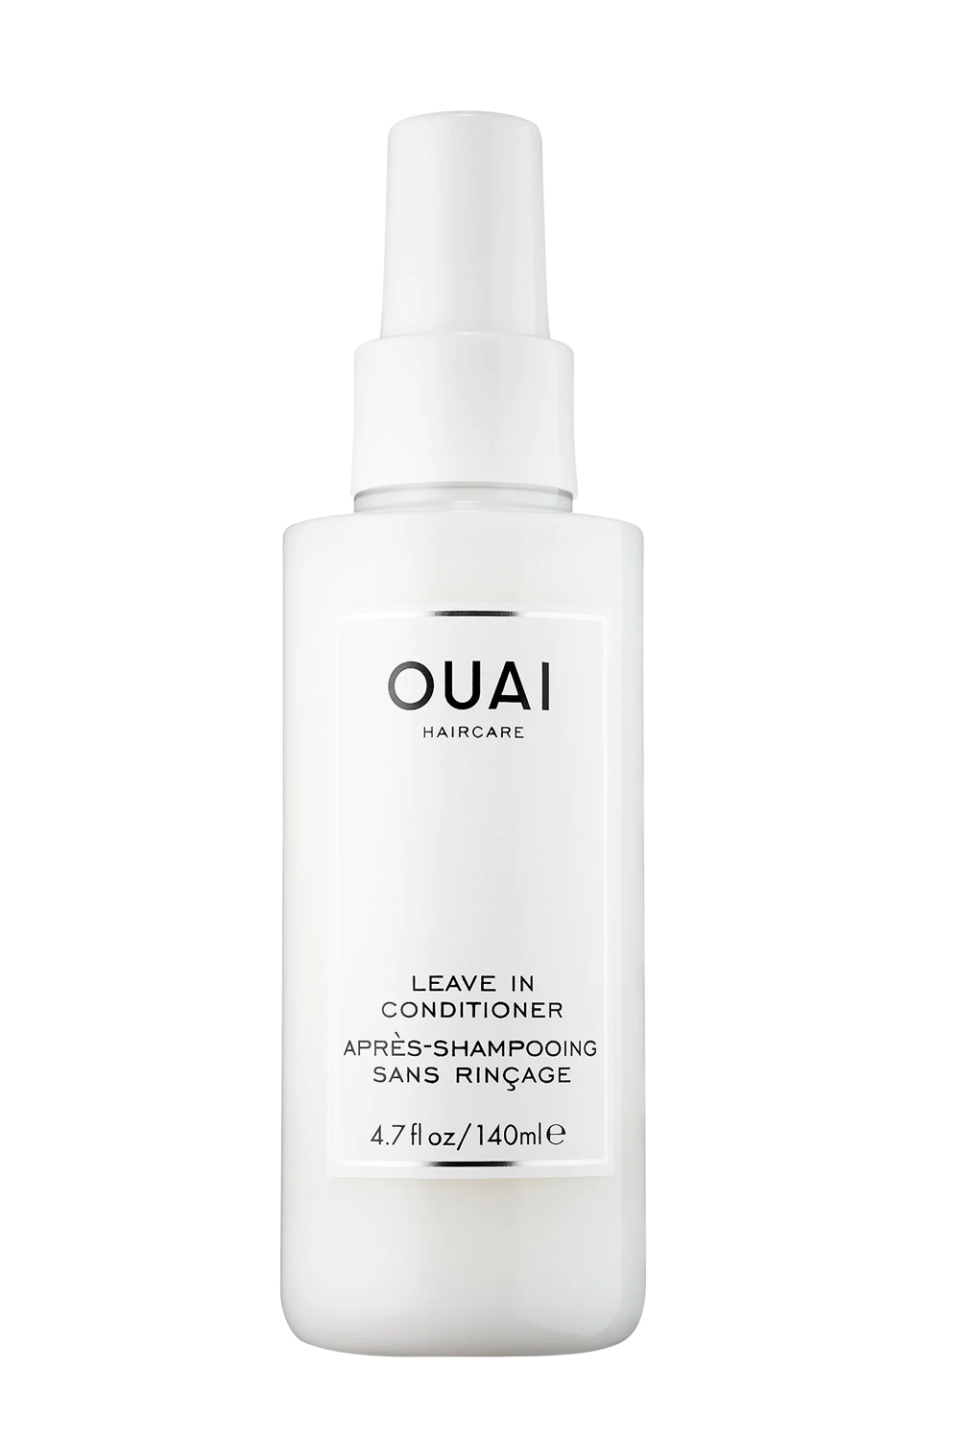 13) Ouai Detangling and Frizz Fighting Leave in Conditioner